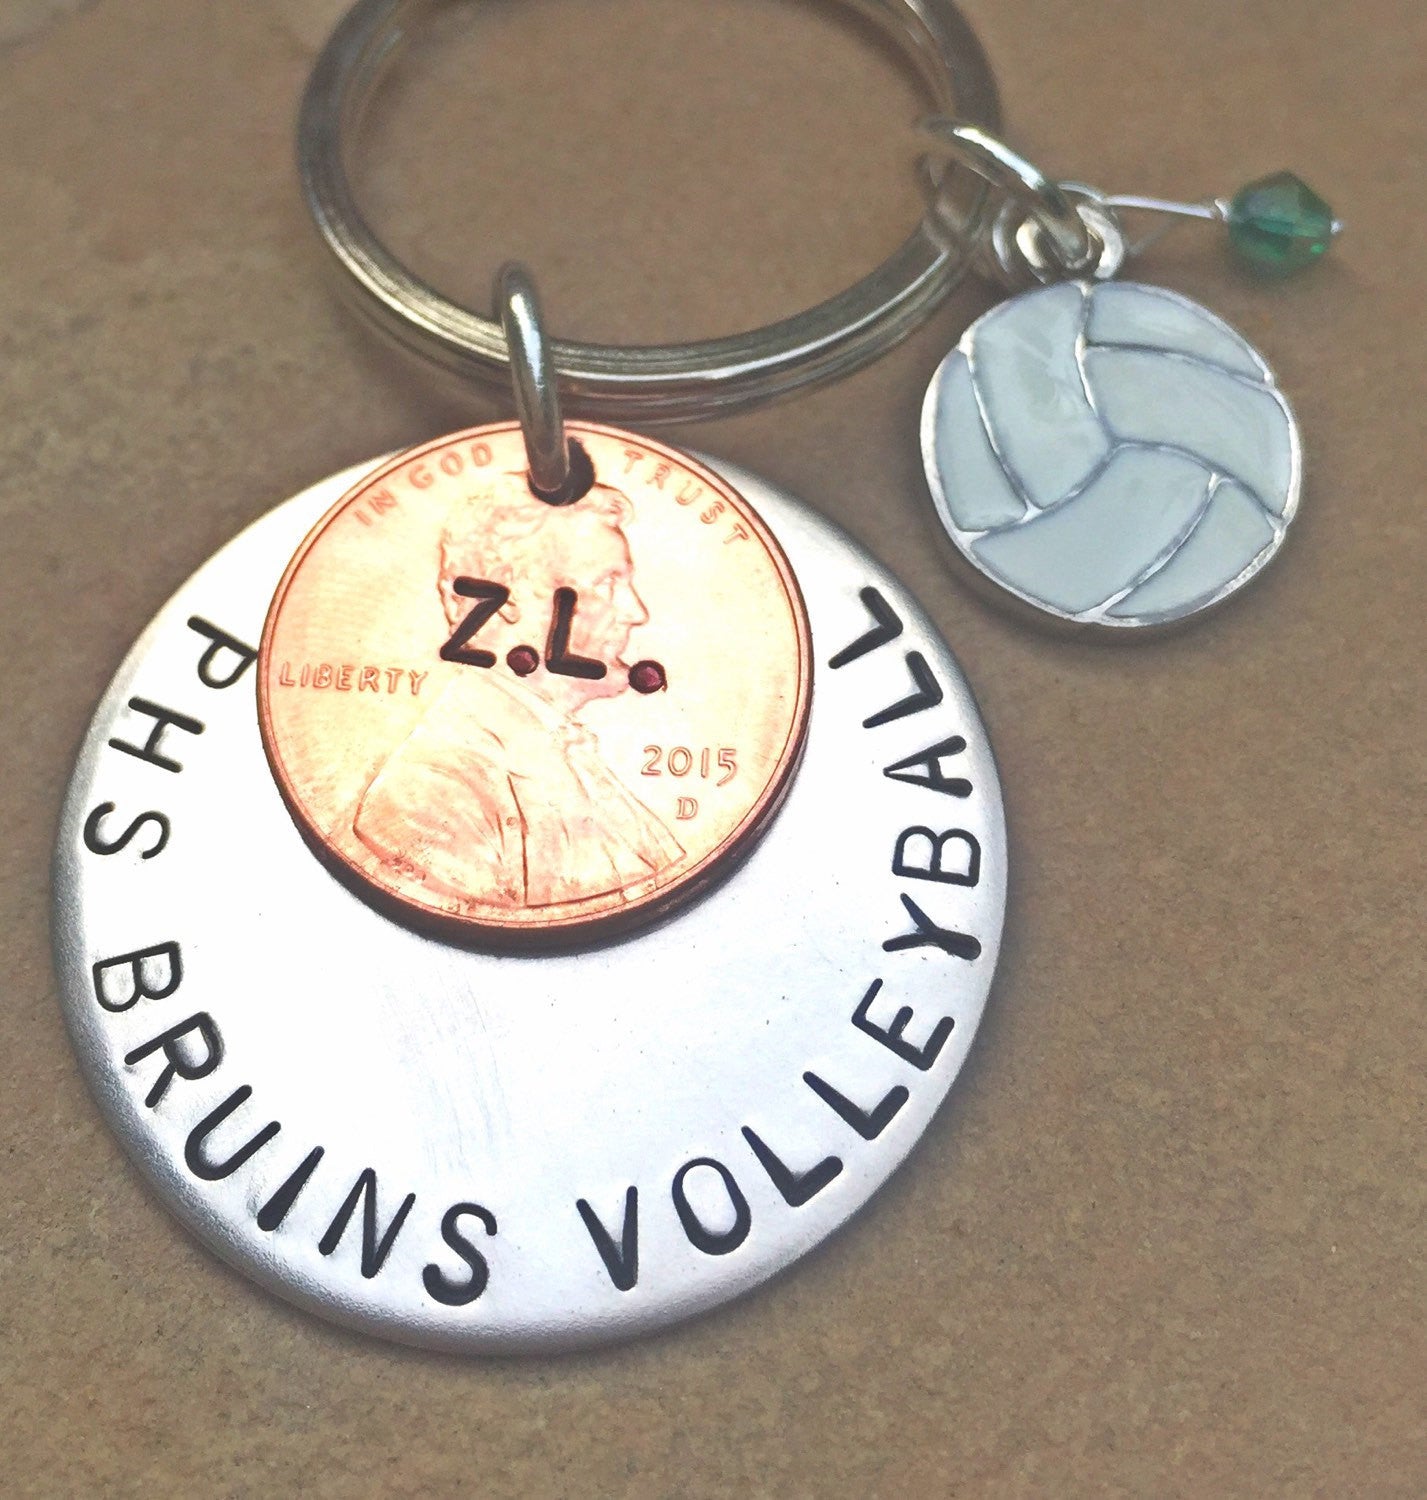 Mountain Bike Gift, Cycling Gift, Soccer Gift, Christmas Gift, High School Sports Keychain, Volleyball Keychain, Personalized Team Sports - Natashaaloha, jewelry, bracelets, necklace, keychains, fishing lures, gifts for men, charms, personalized, 